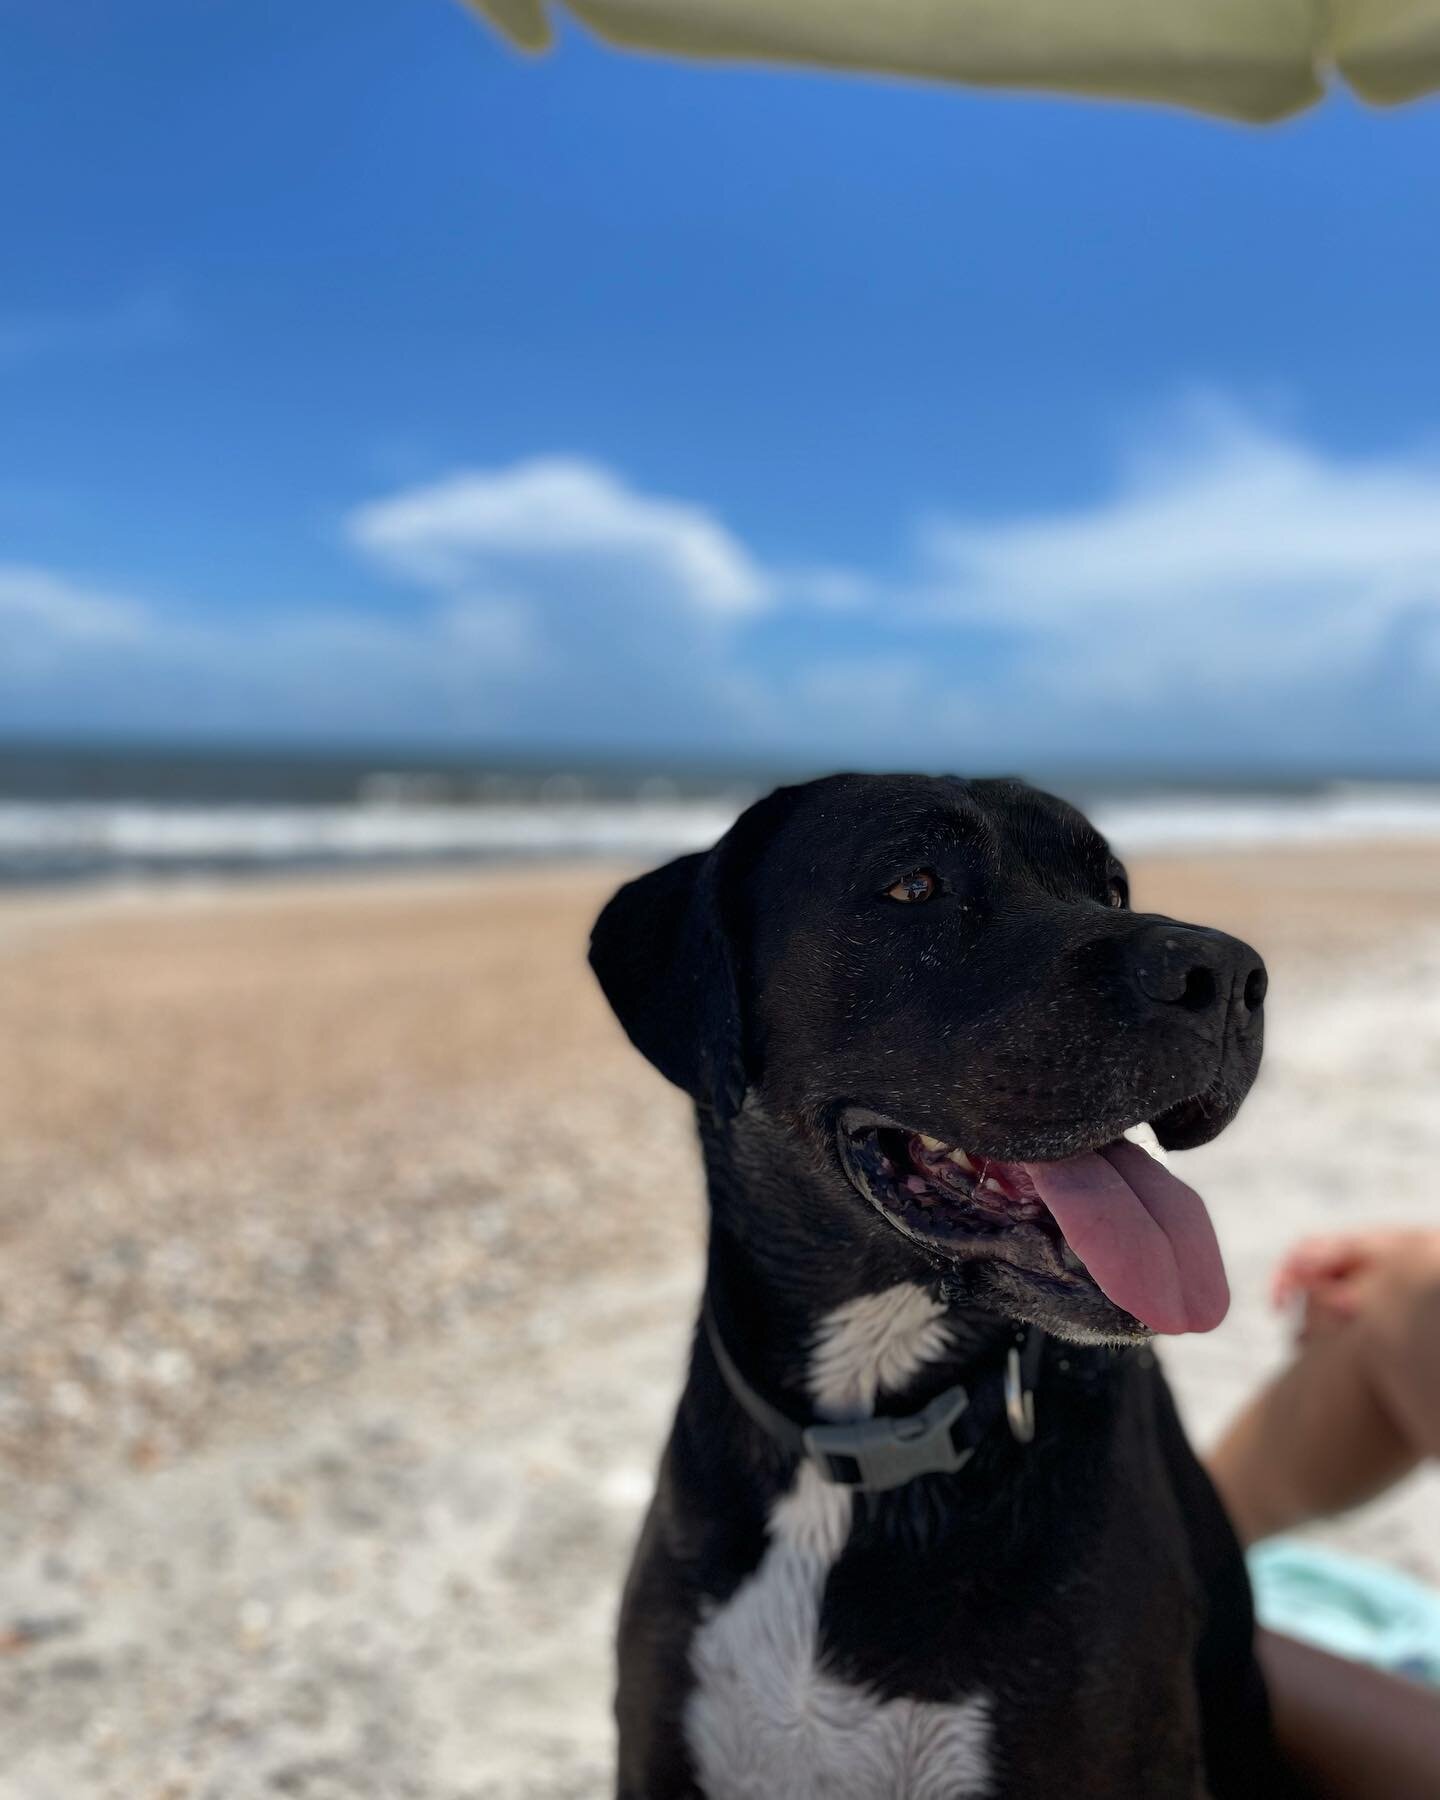 When Tank is not greeting you at NGO, you can find him here 🏖
#tankshappyplace #beachdog #shopdog #pontevedrabeach